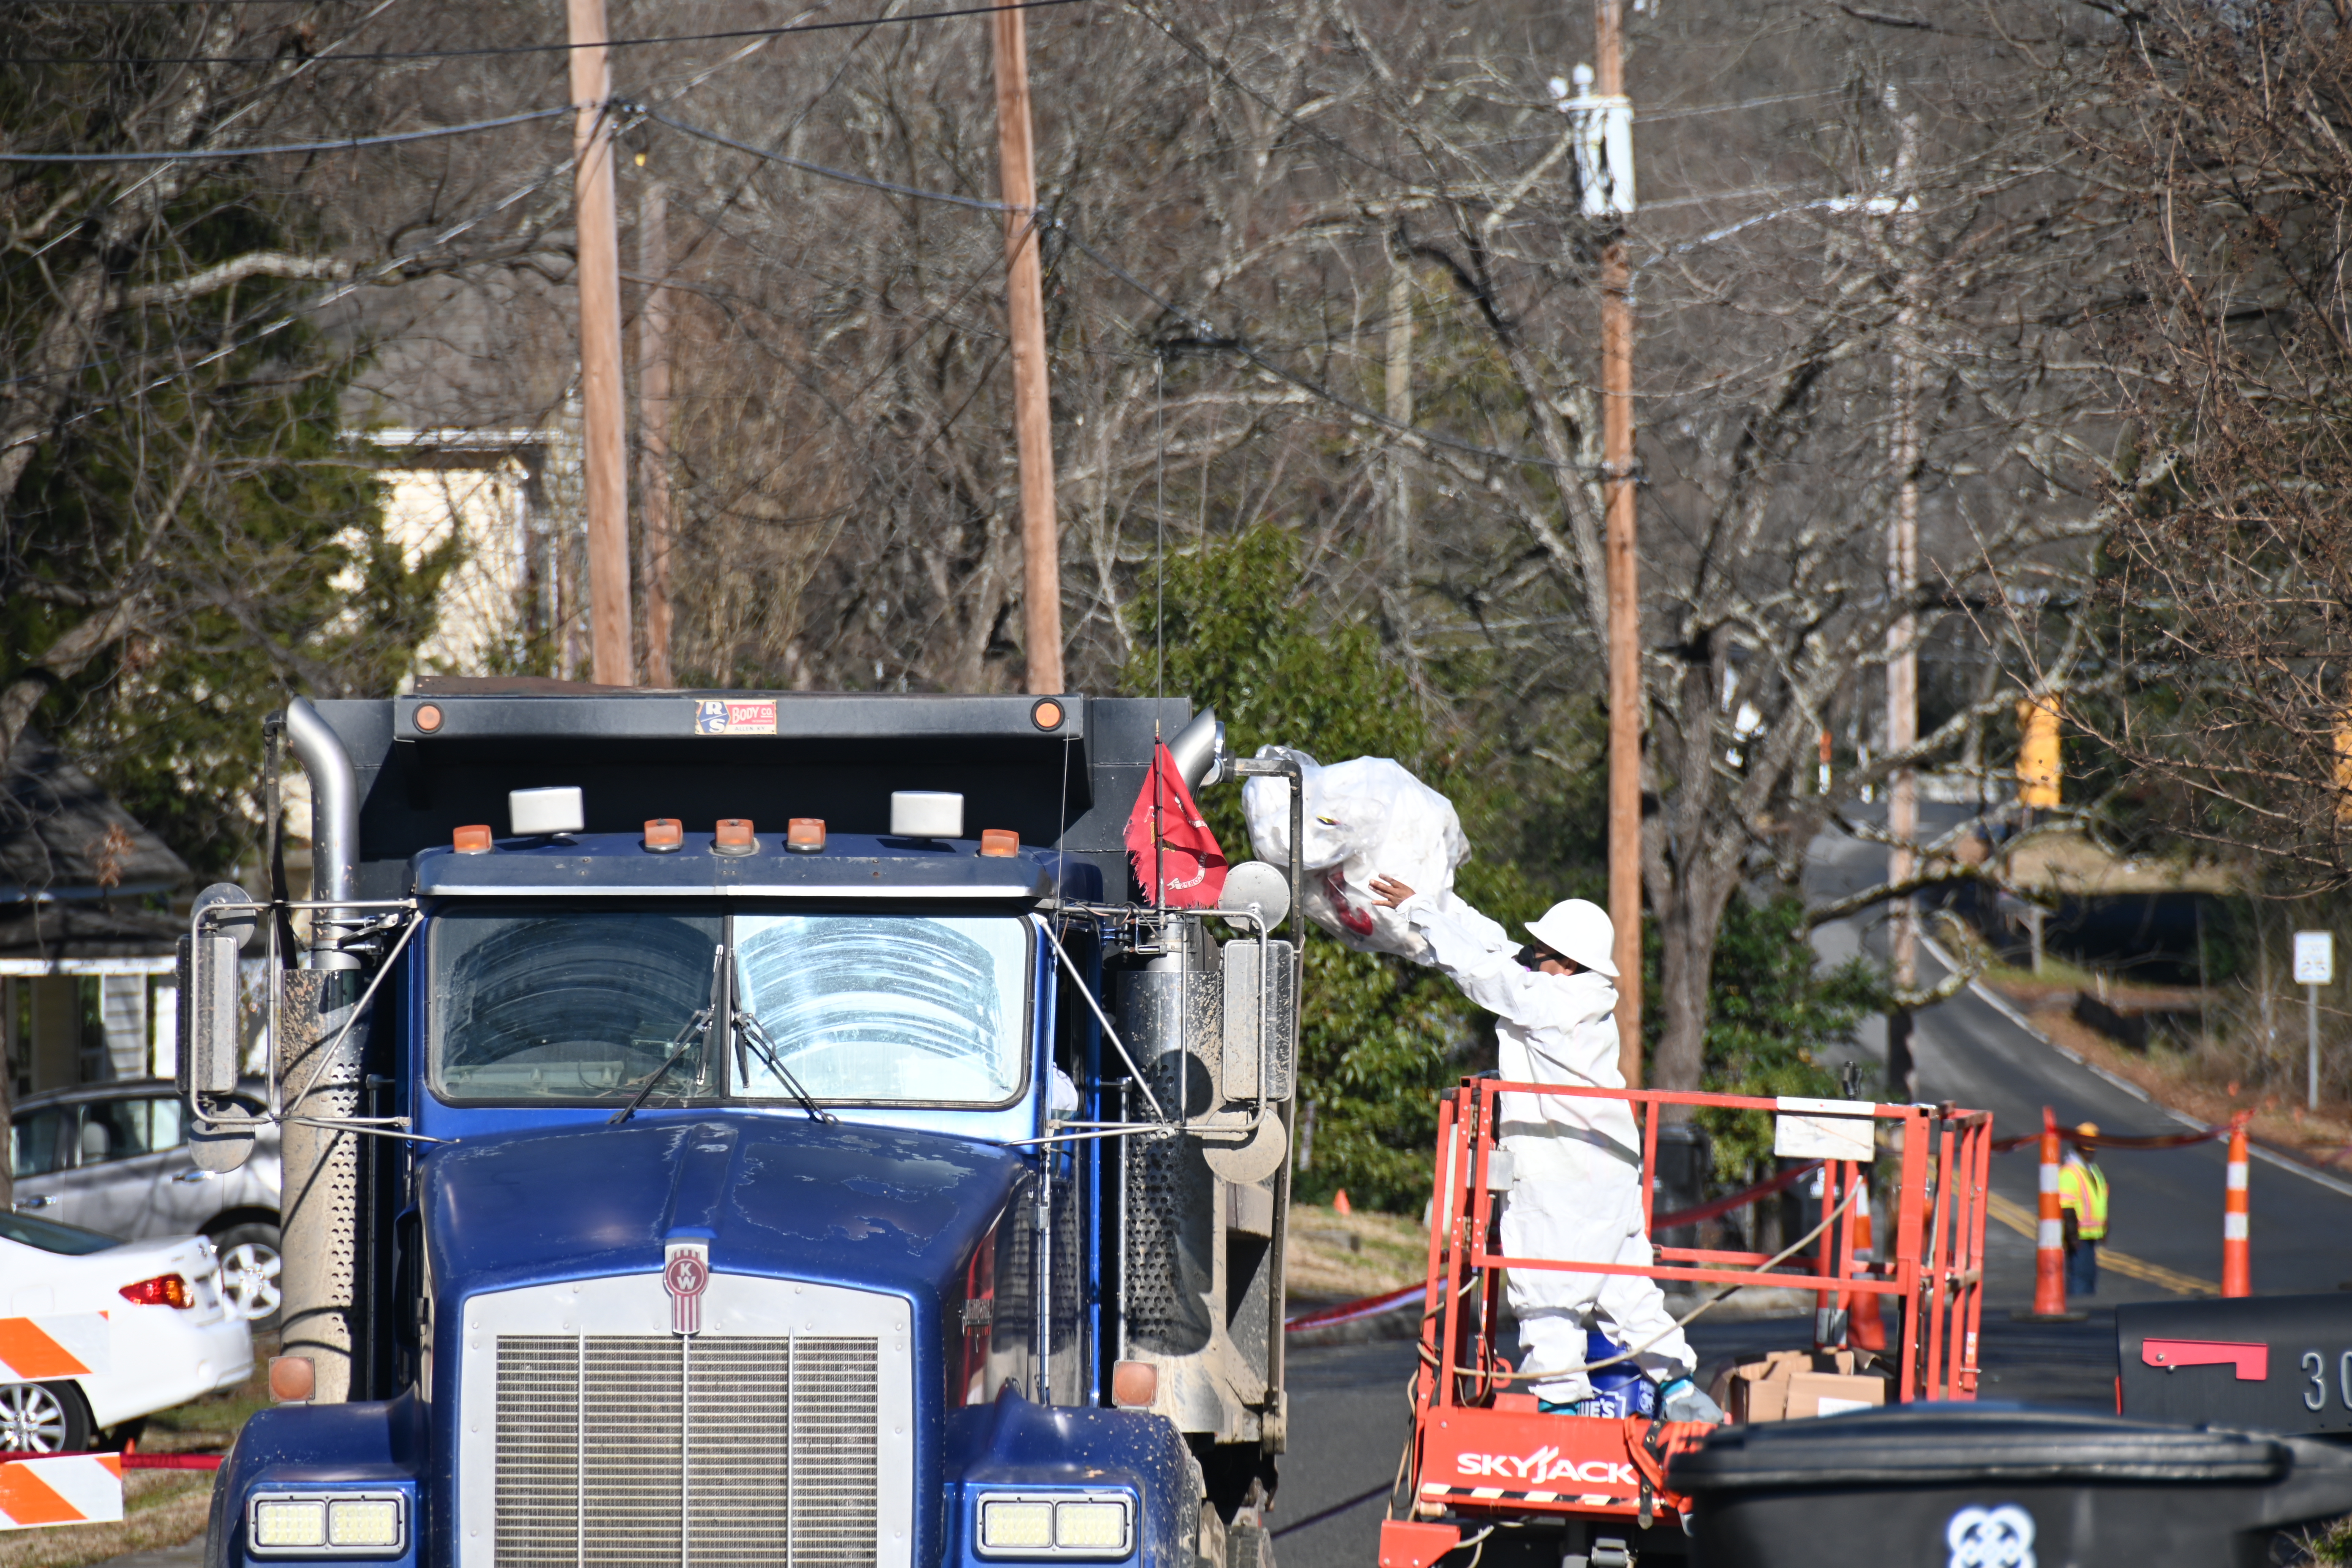 Contractors for Charlotte Water remove asbestos-laden soil from Sloan Street in Davidson during a water main upgrade project in January.